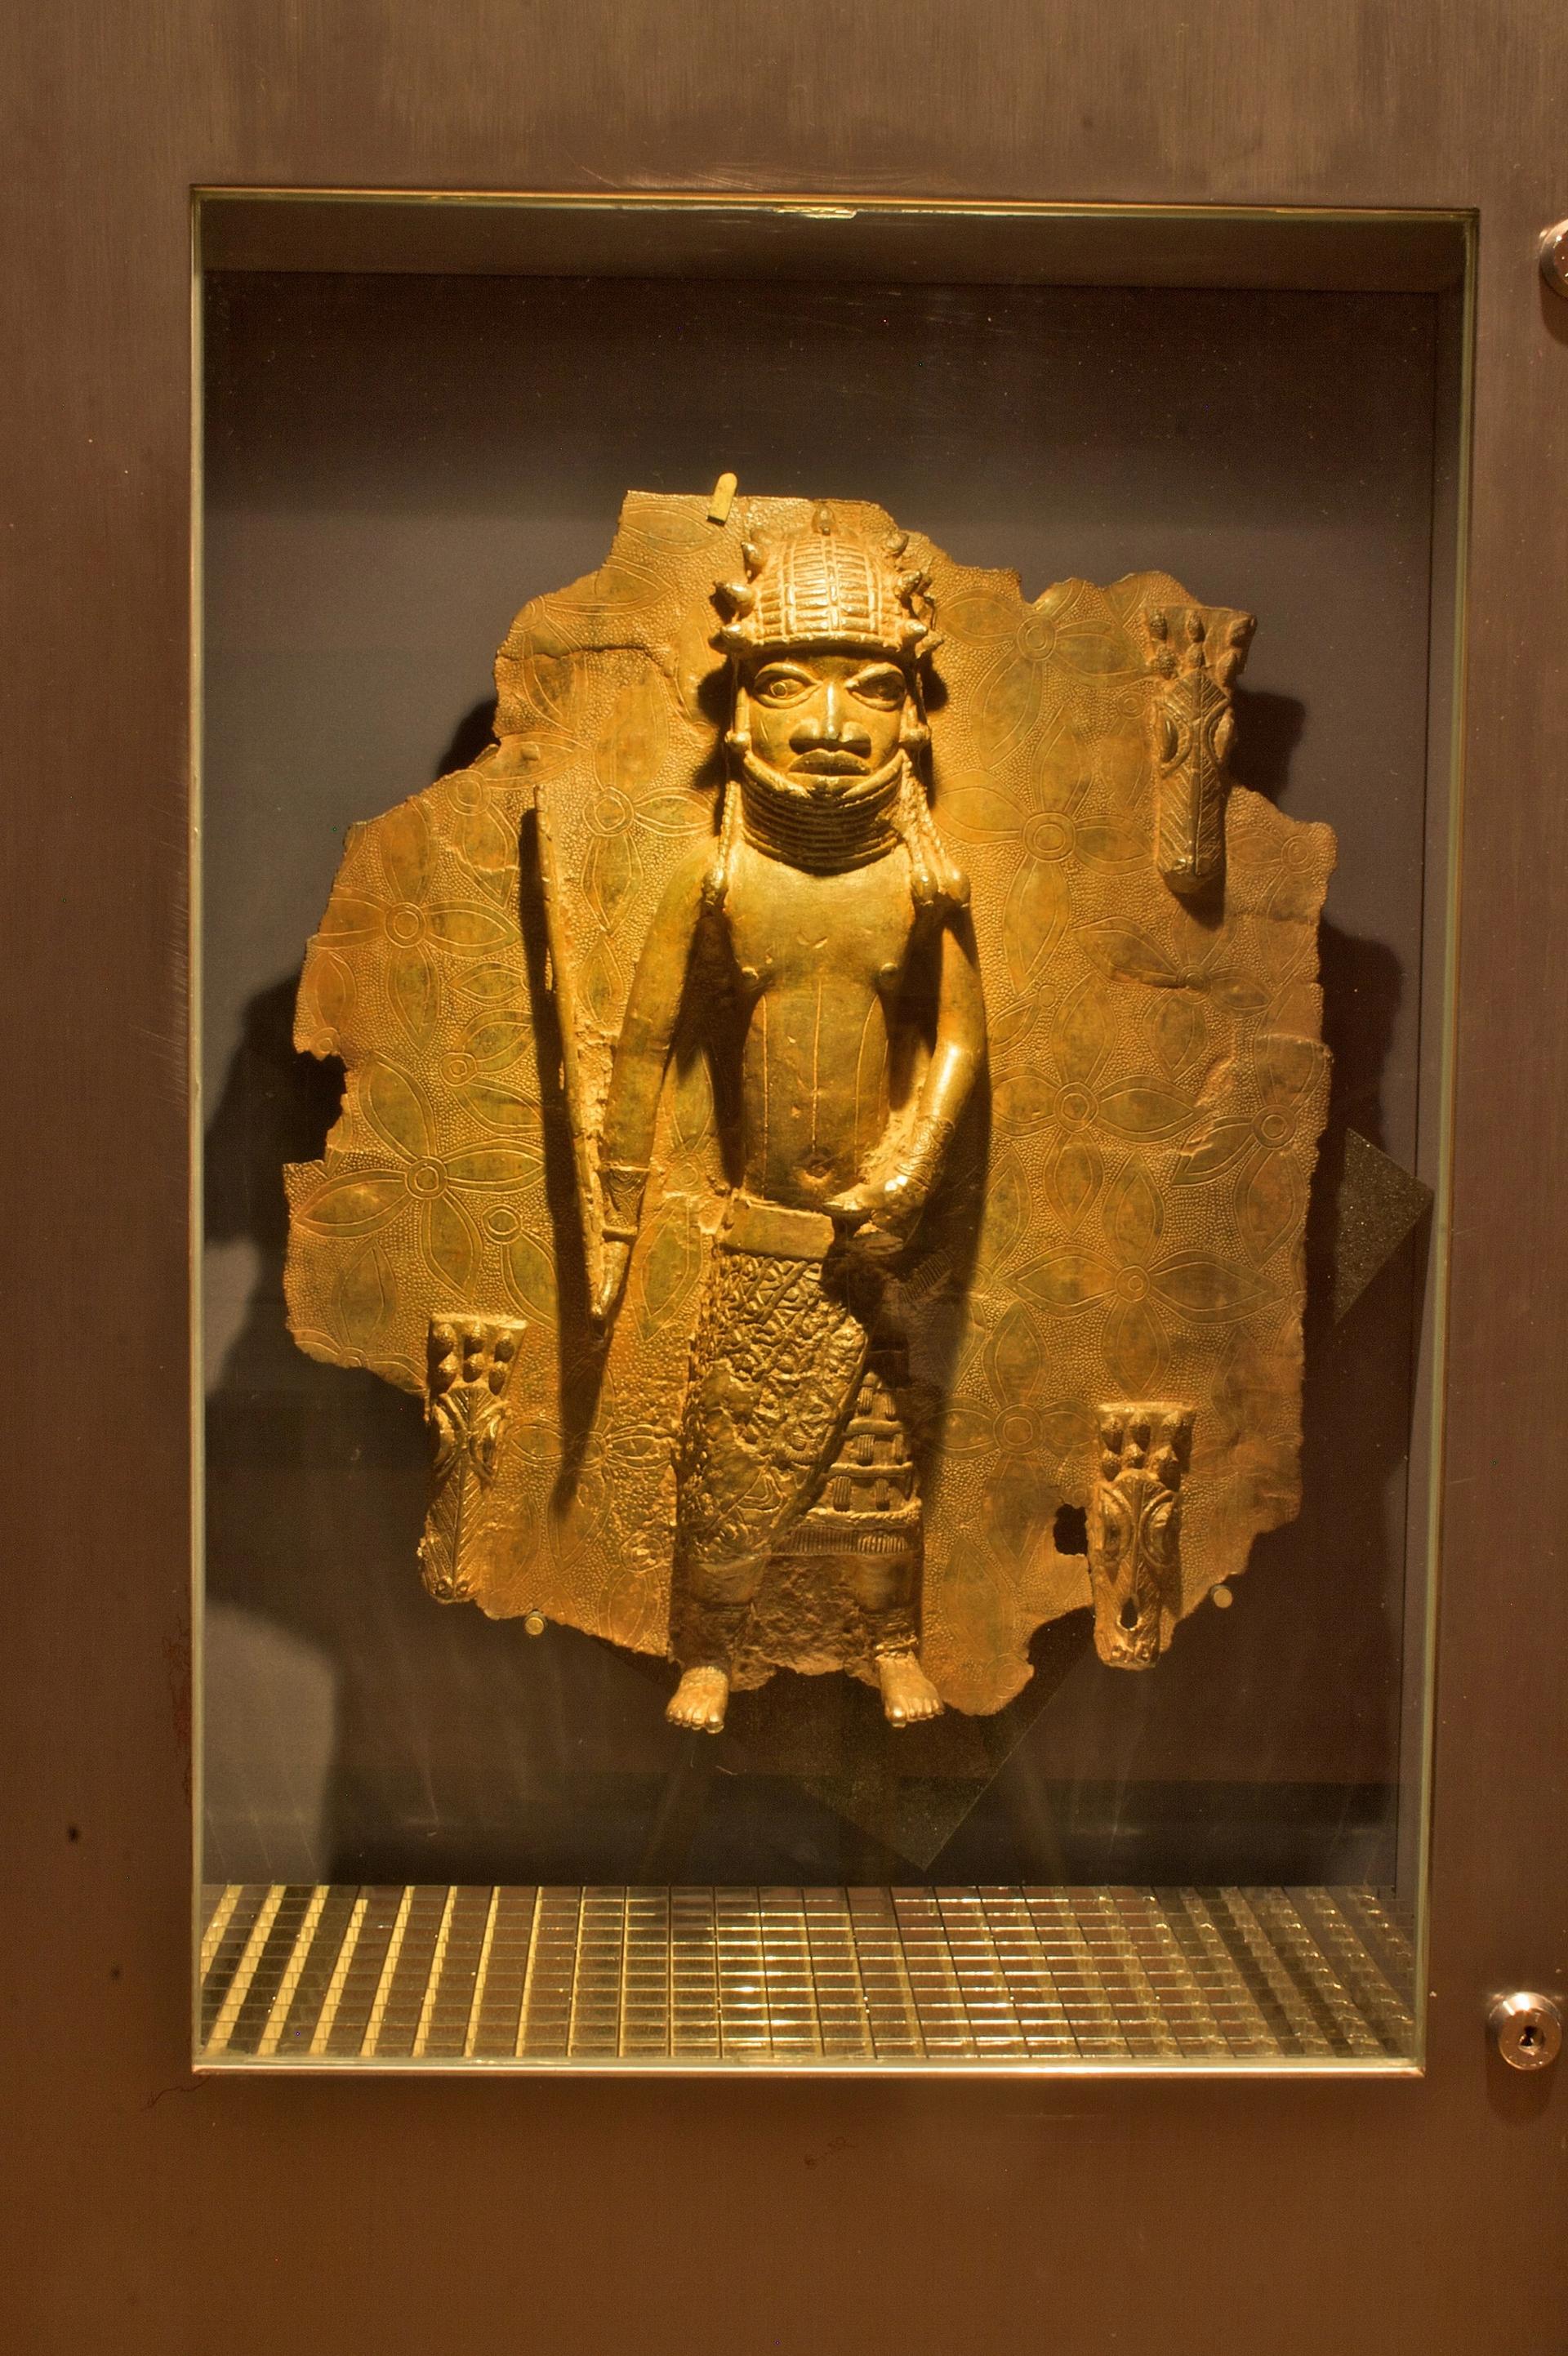 A Benin bronze at the Horniman Museum in south London Photo: Mike Peel